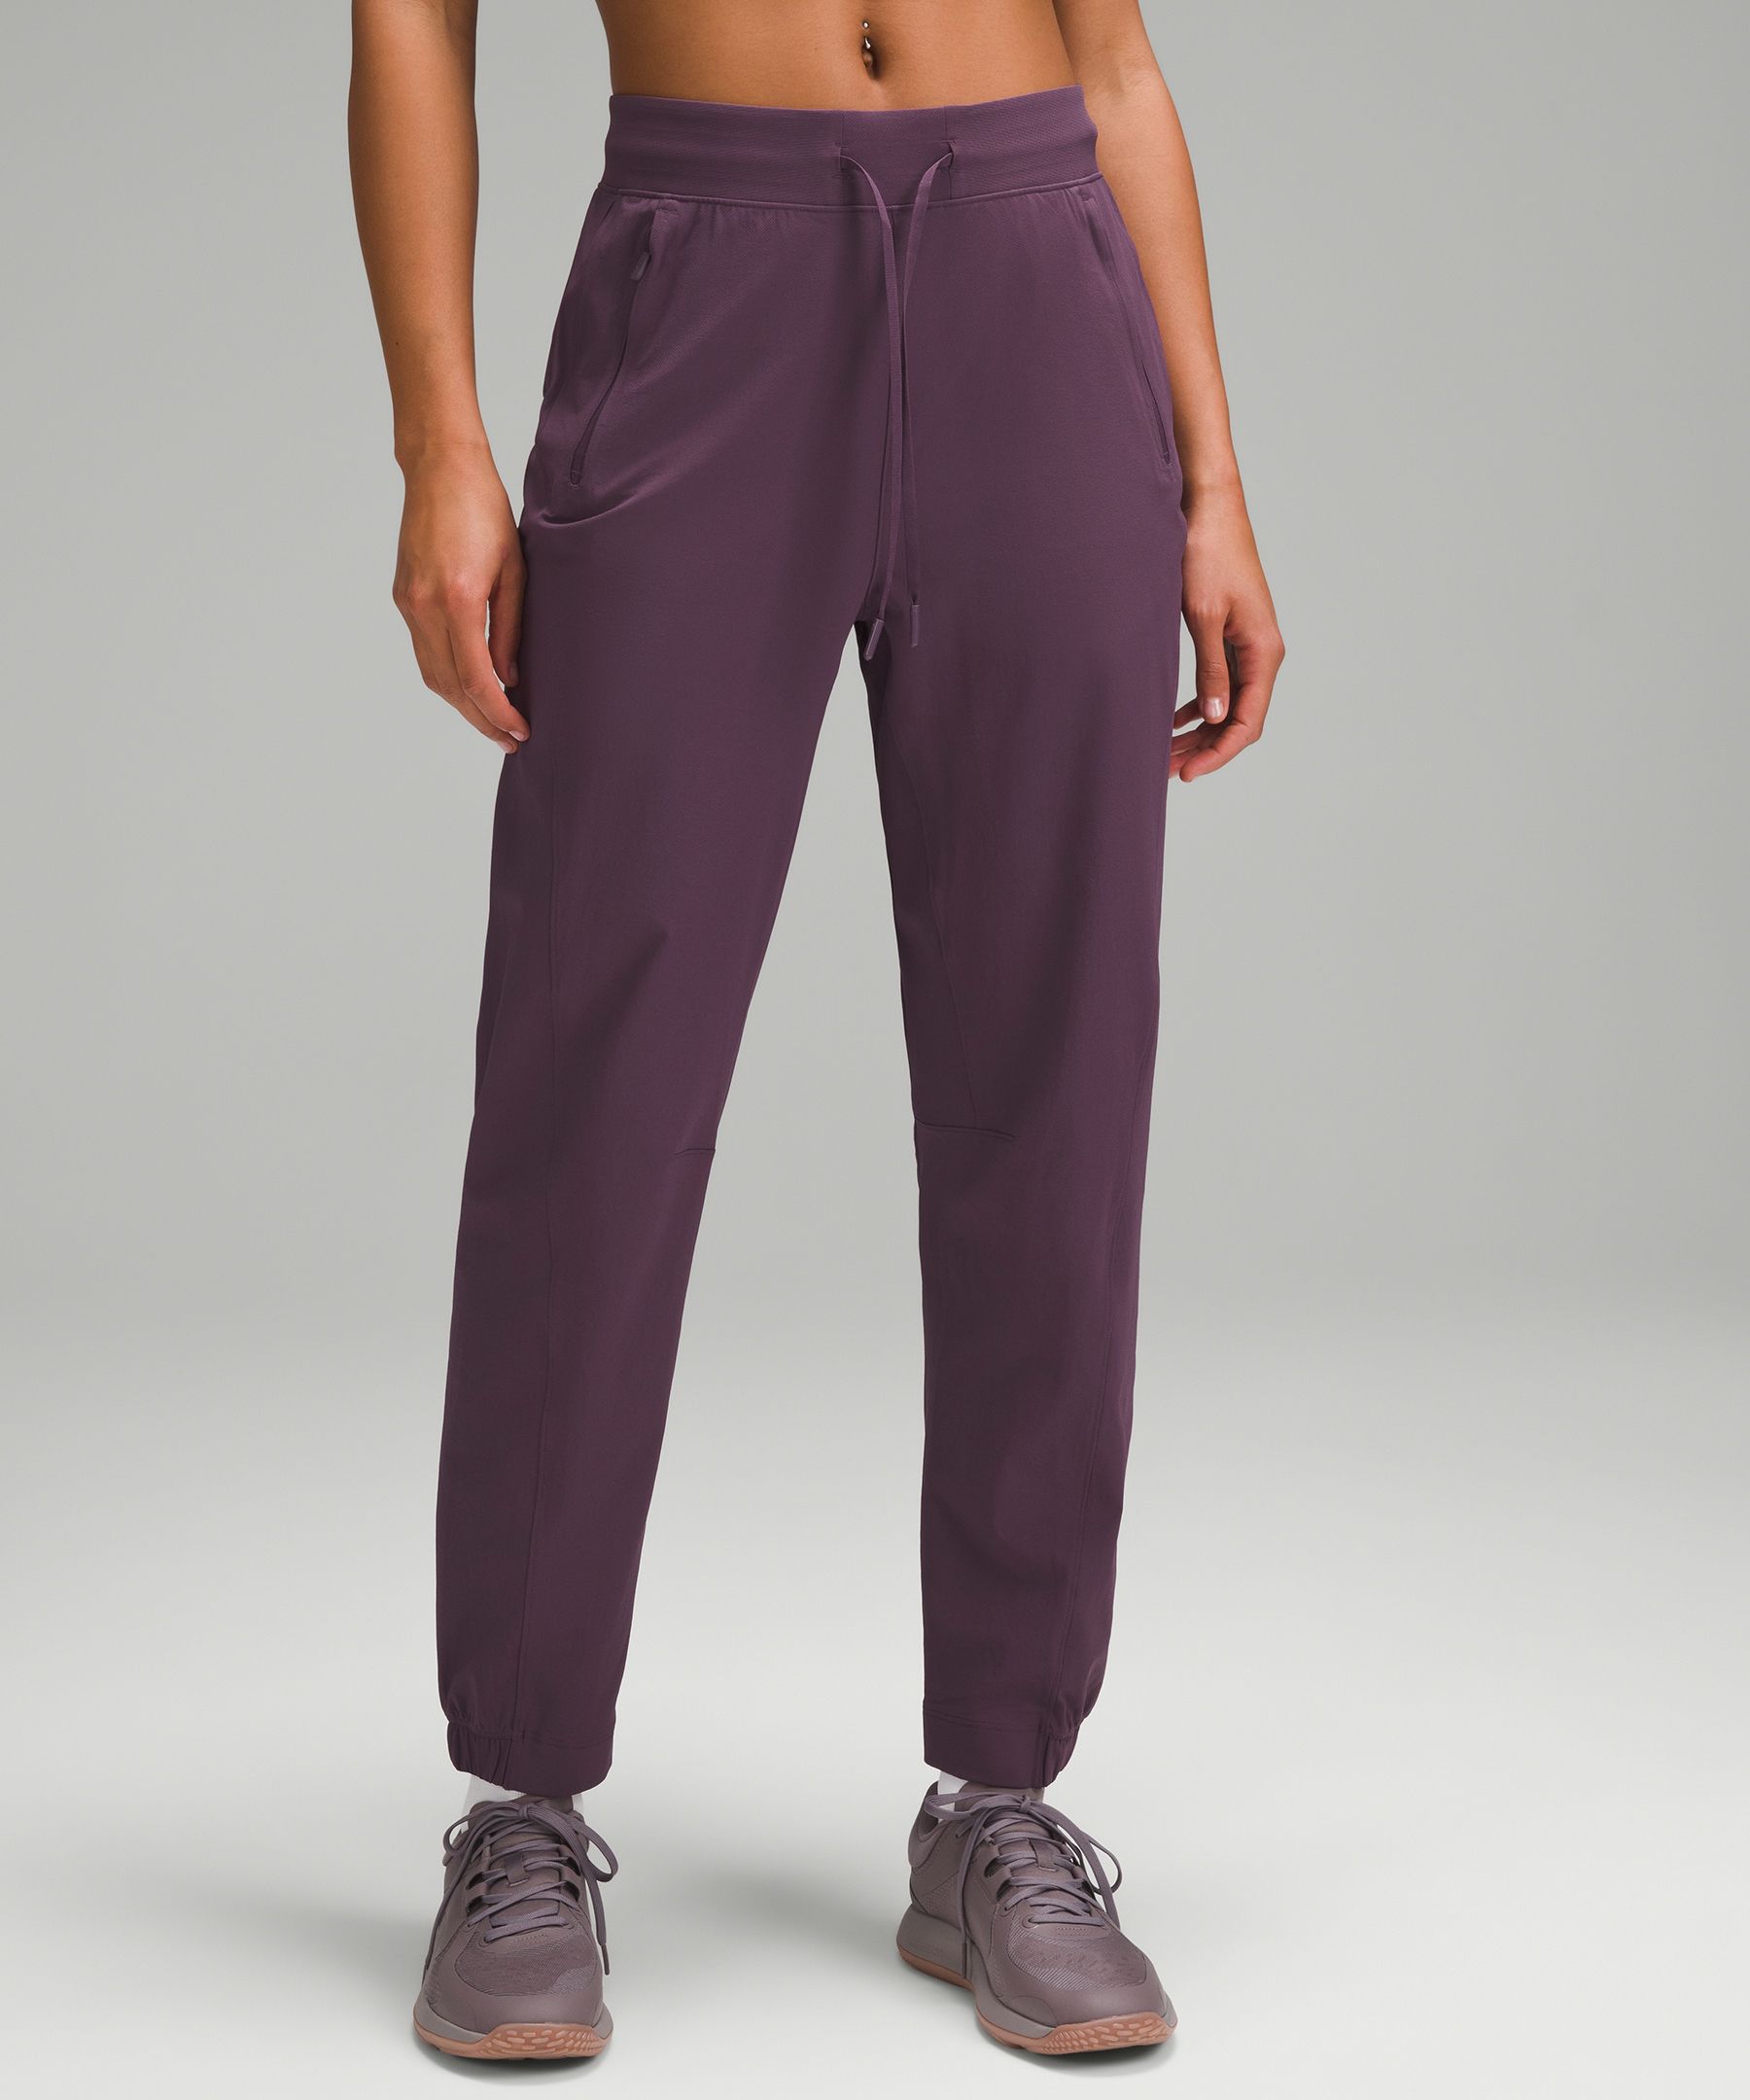 Lululemon athletica License to Train High-Rise Pant, Women's Joggers